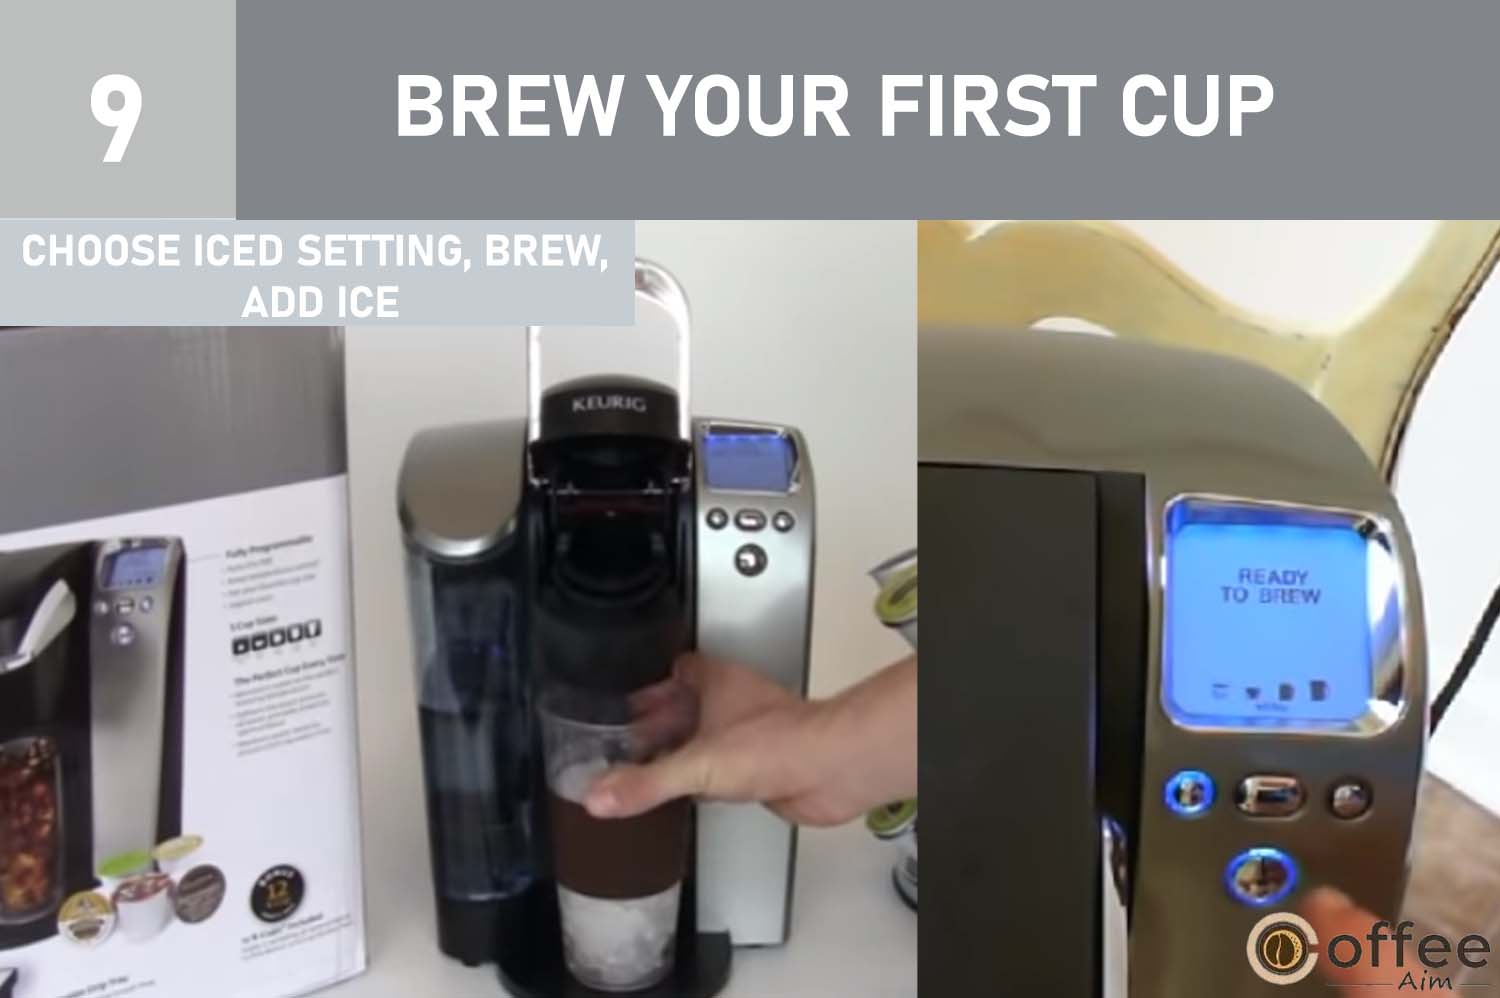 To make an Iced Beverage, place a tall glass with ice on the Drip Tray base. Choose a K-Cup, select the 3.25 oz brew size, and press the brew button. After brewing, add more ice and customize with cream and sugar as desired.